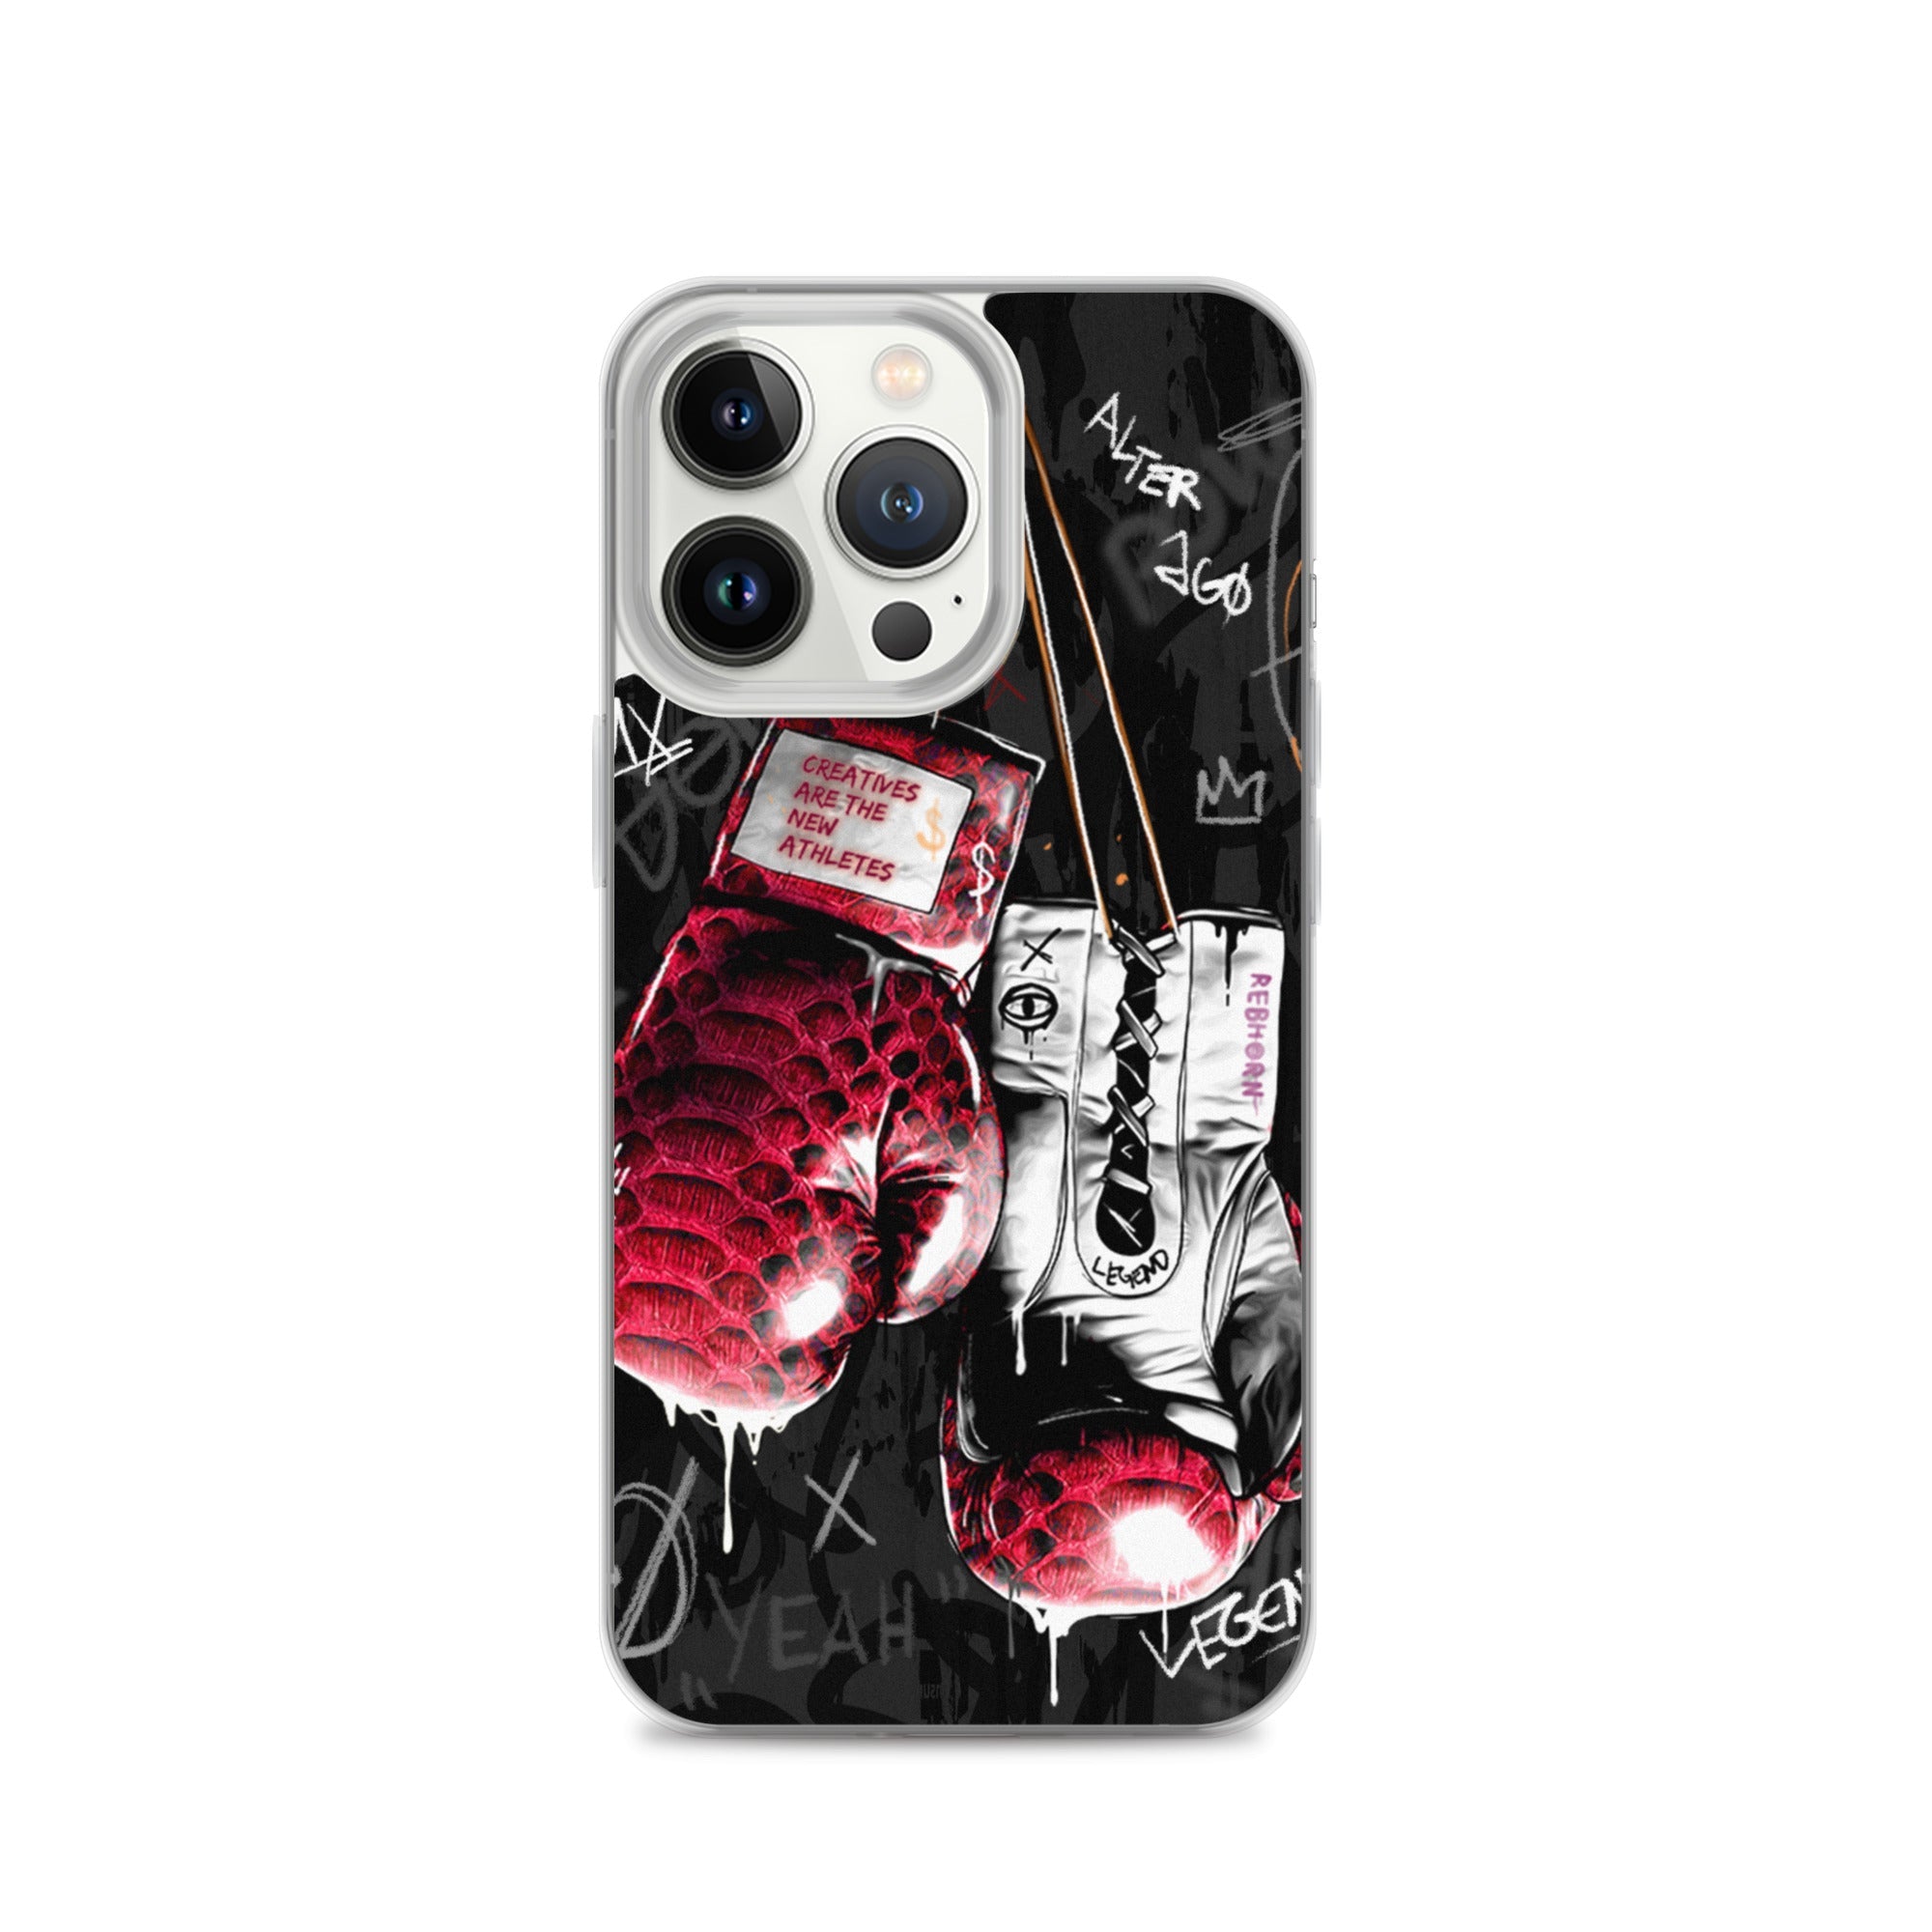 Creatives Are The New Athletes (Boxing Gloves) iPhone Case - REBHORN DESIGN